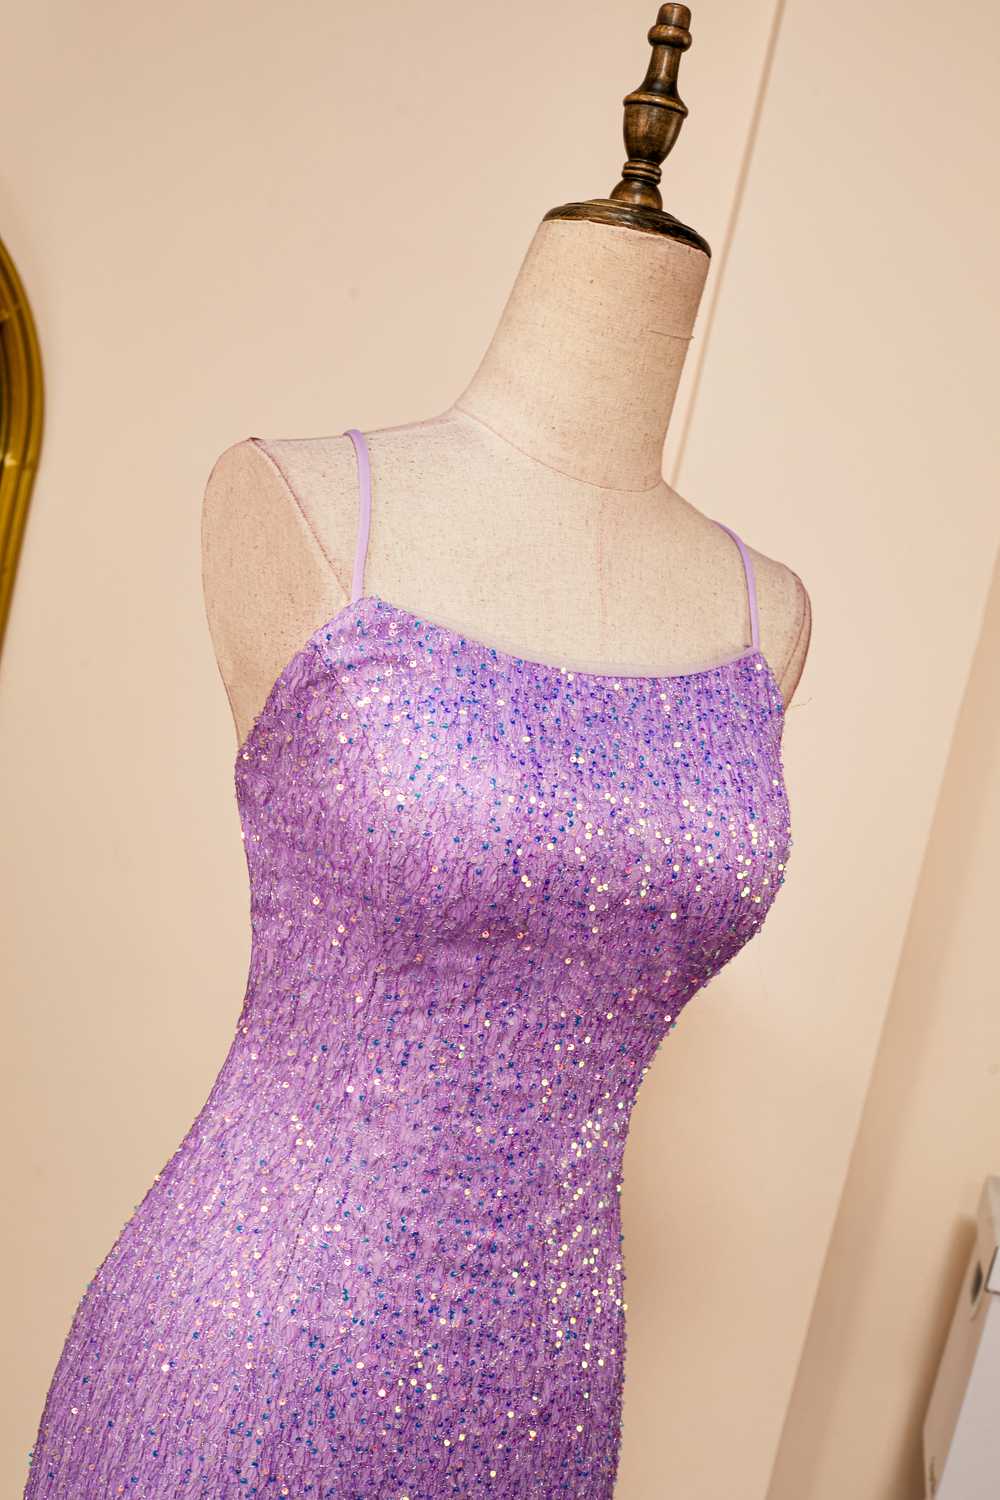 Homecoming Dress Inspo, Lavender Lace-Up Sheath Sequins Homecoming Dress